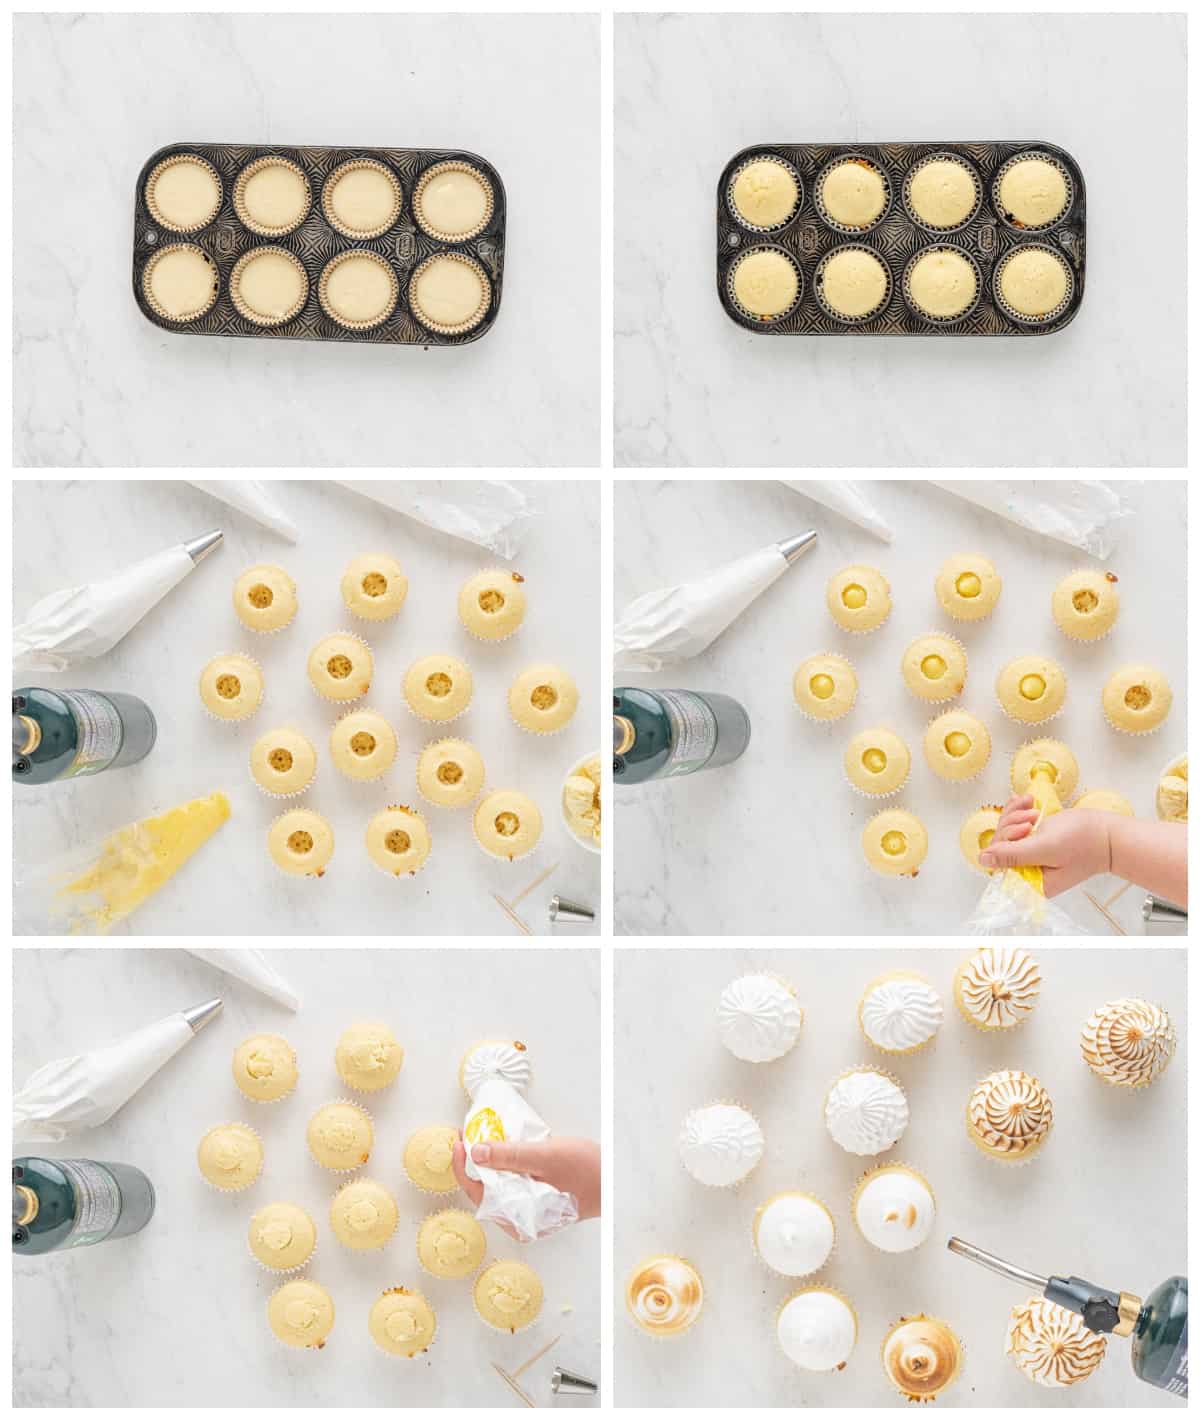 how to make lemon meringue cupcakes step by step photo instructions